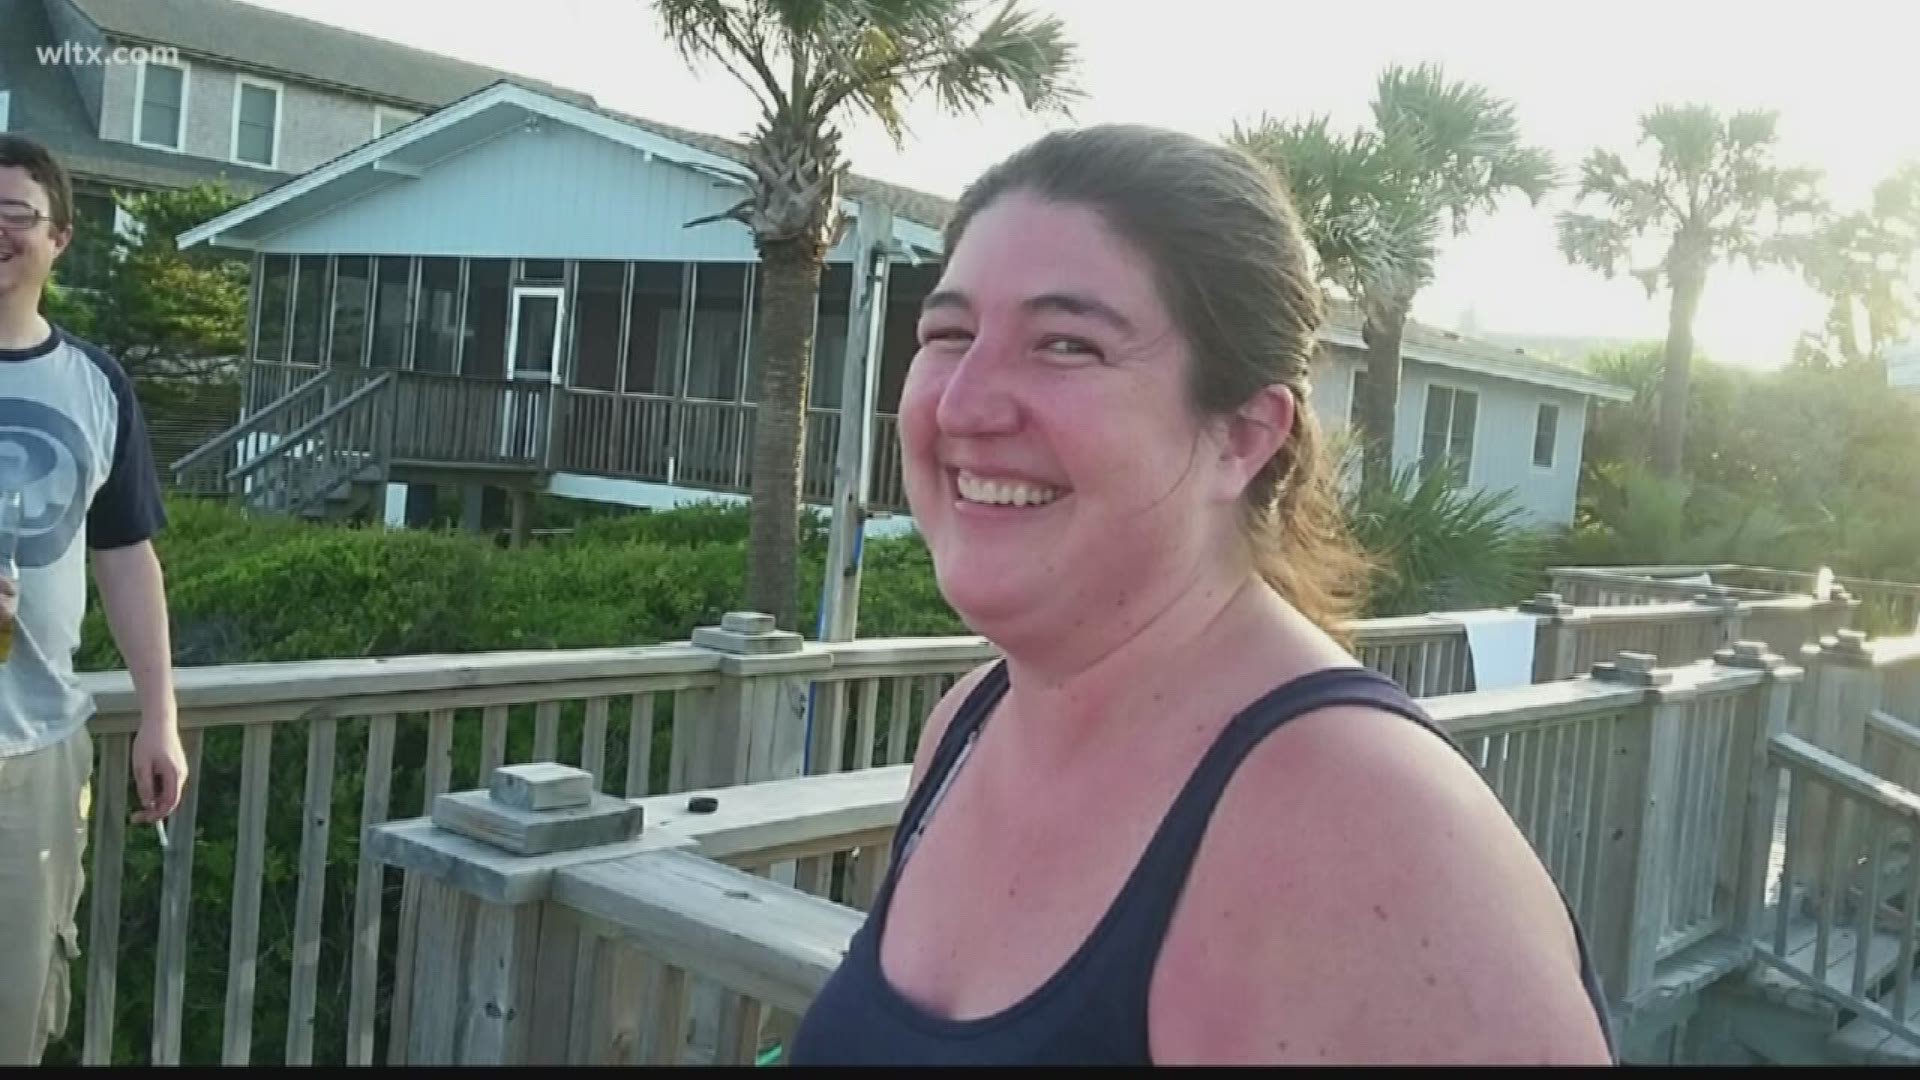 The mom was watching fireworks with her child when she was struck by one of the explosive devices. Now she's having surgery.